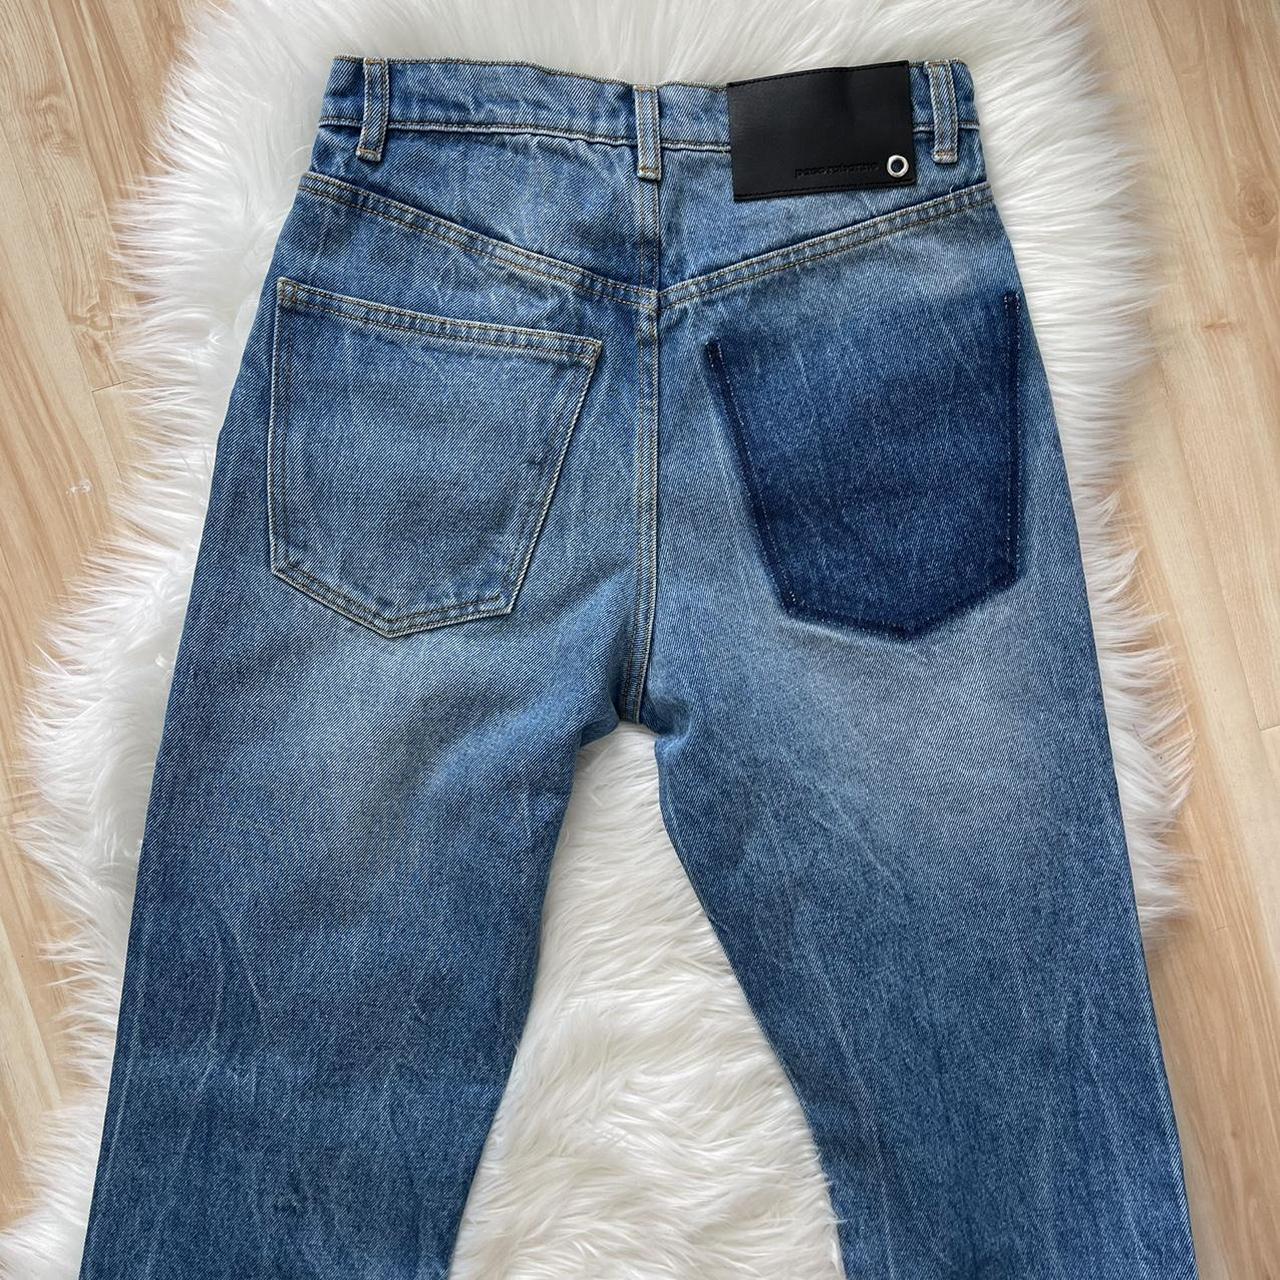 Product Image 1 - Paco Rabanne tapered jeans. 100%